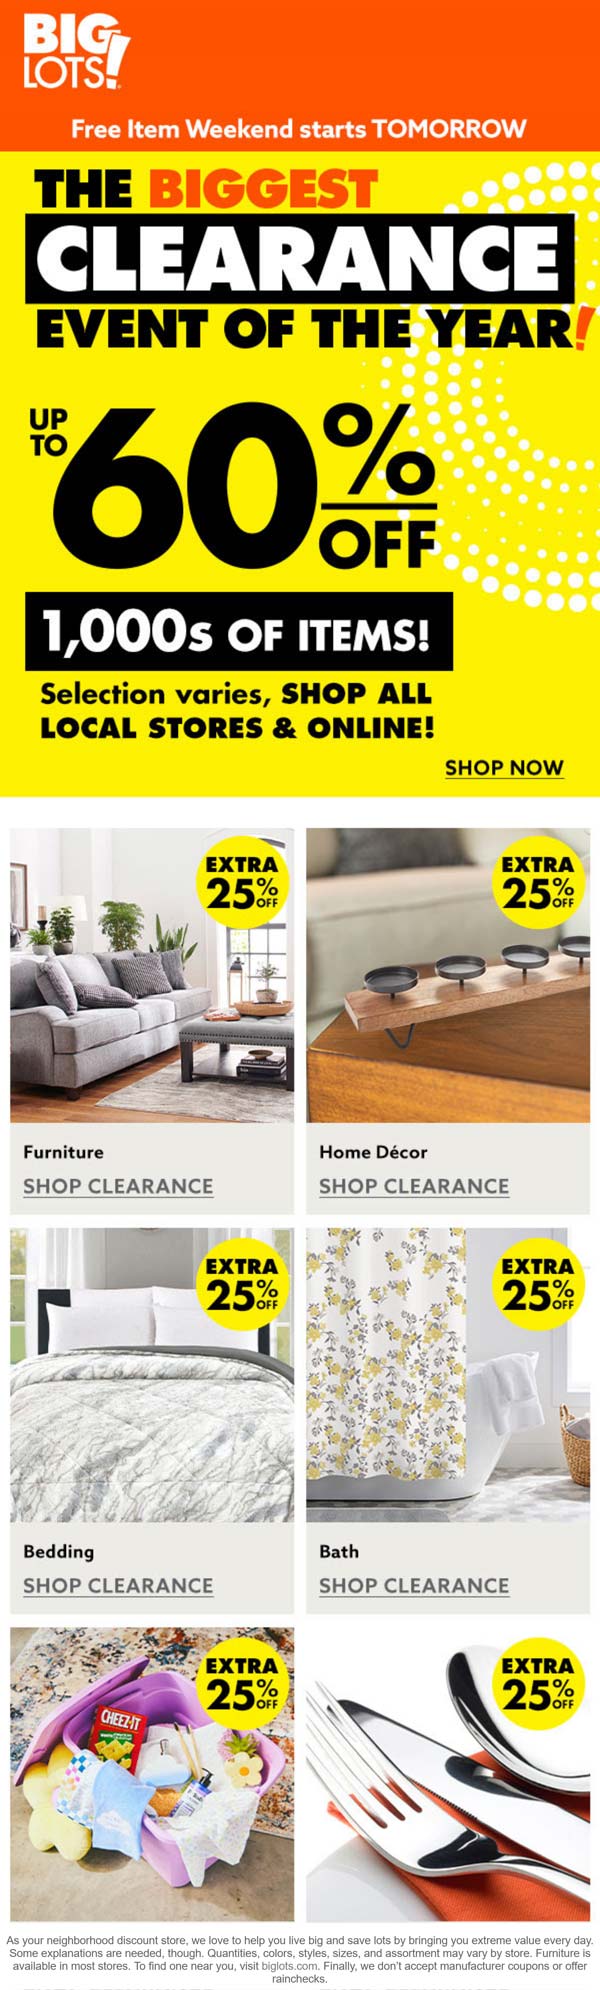 Big Lots stores Coupon  Free item weekend + extra 25% off clearance at Big Lots #biglots 